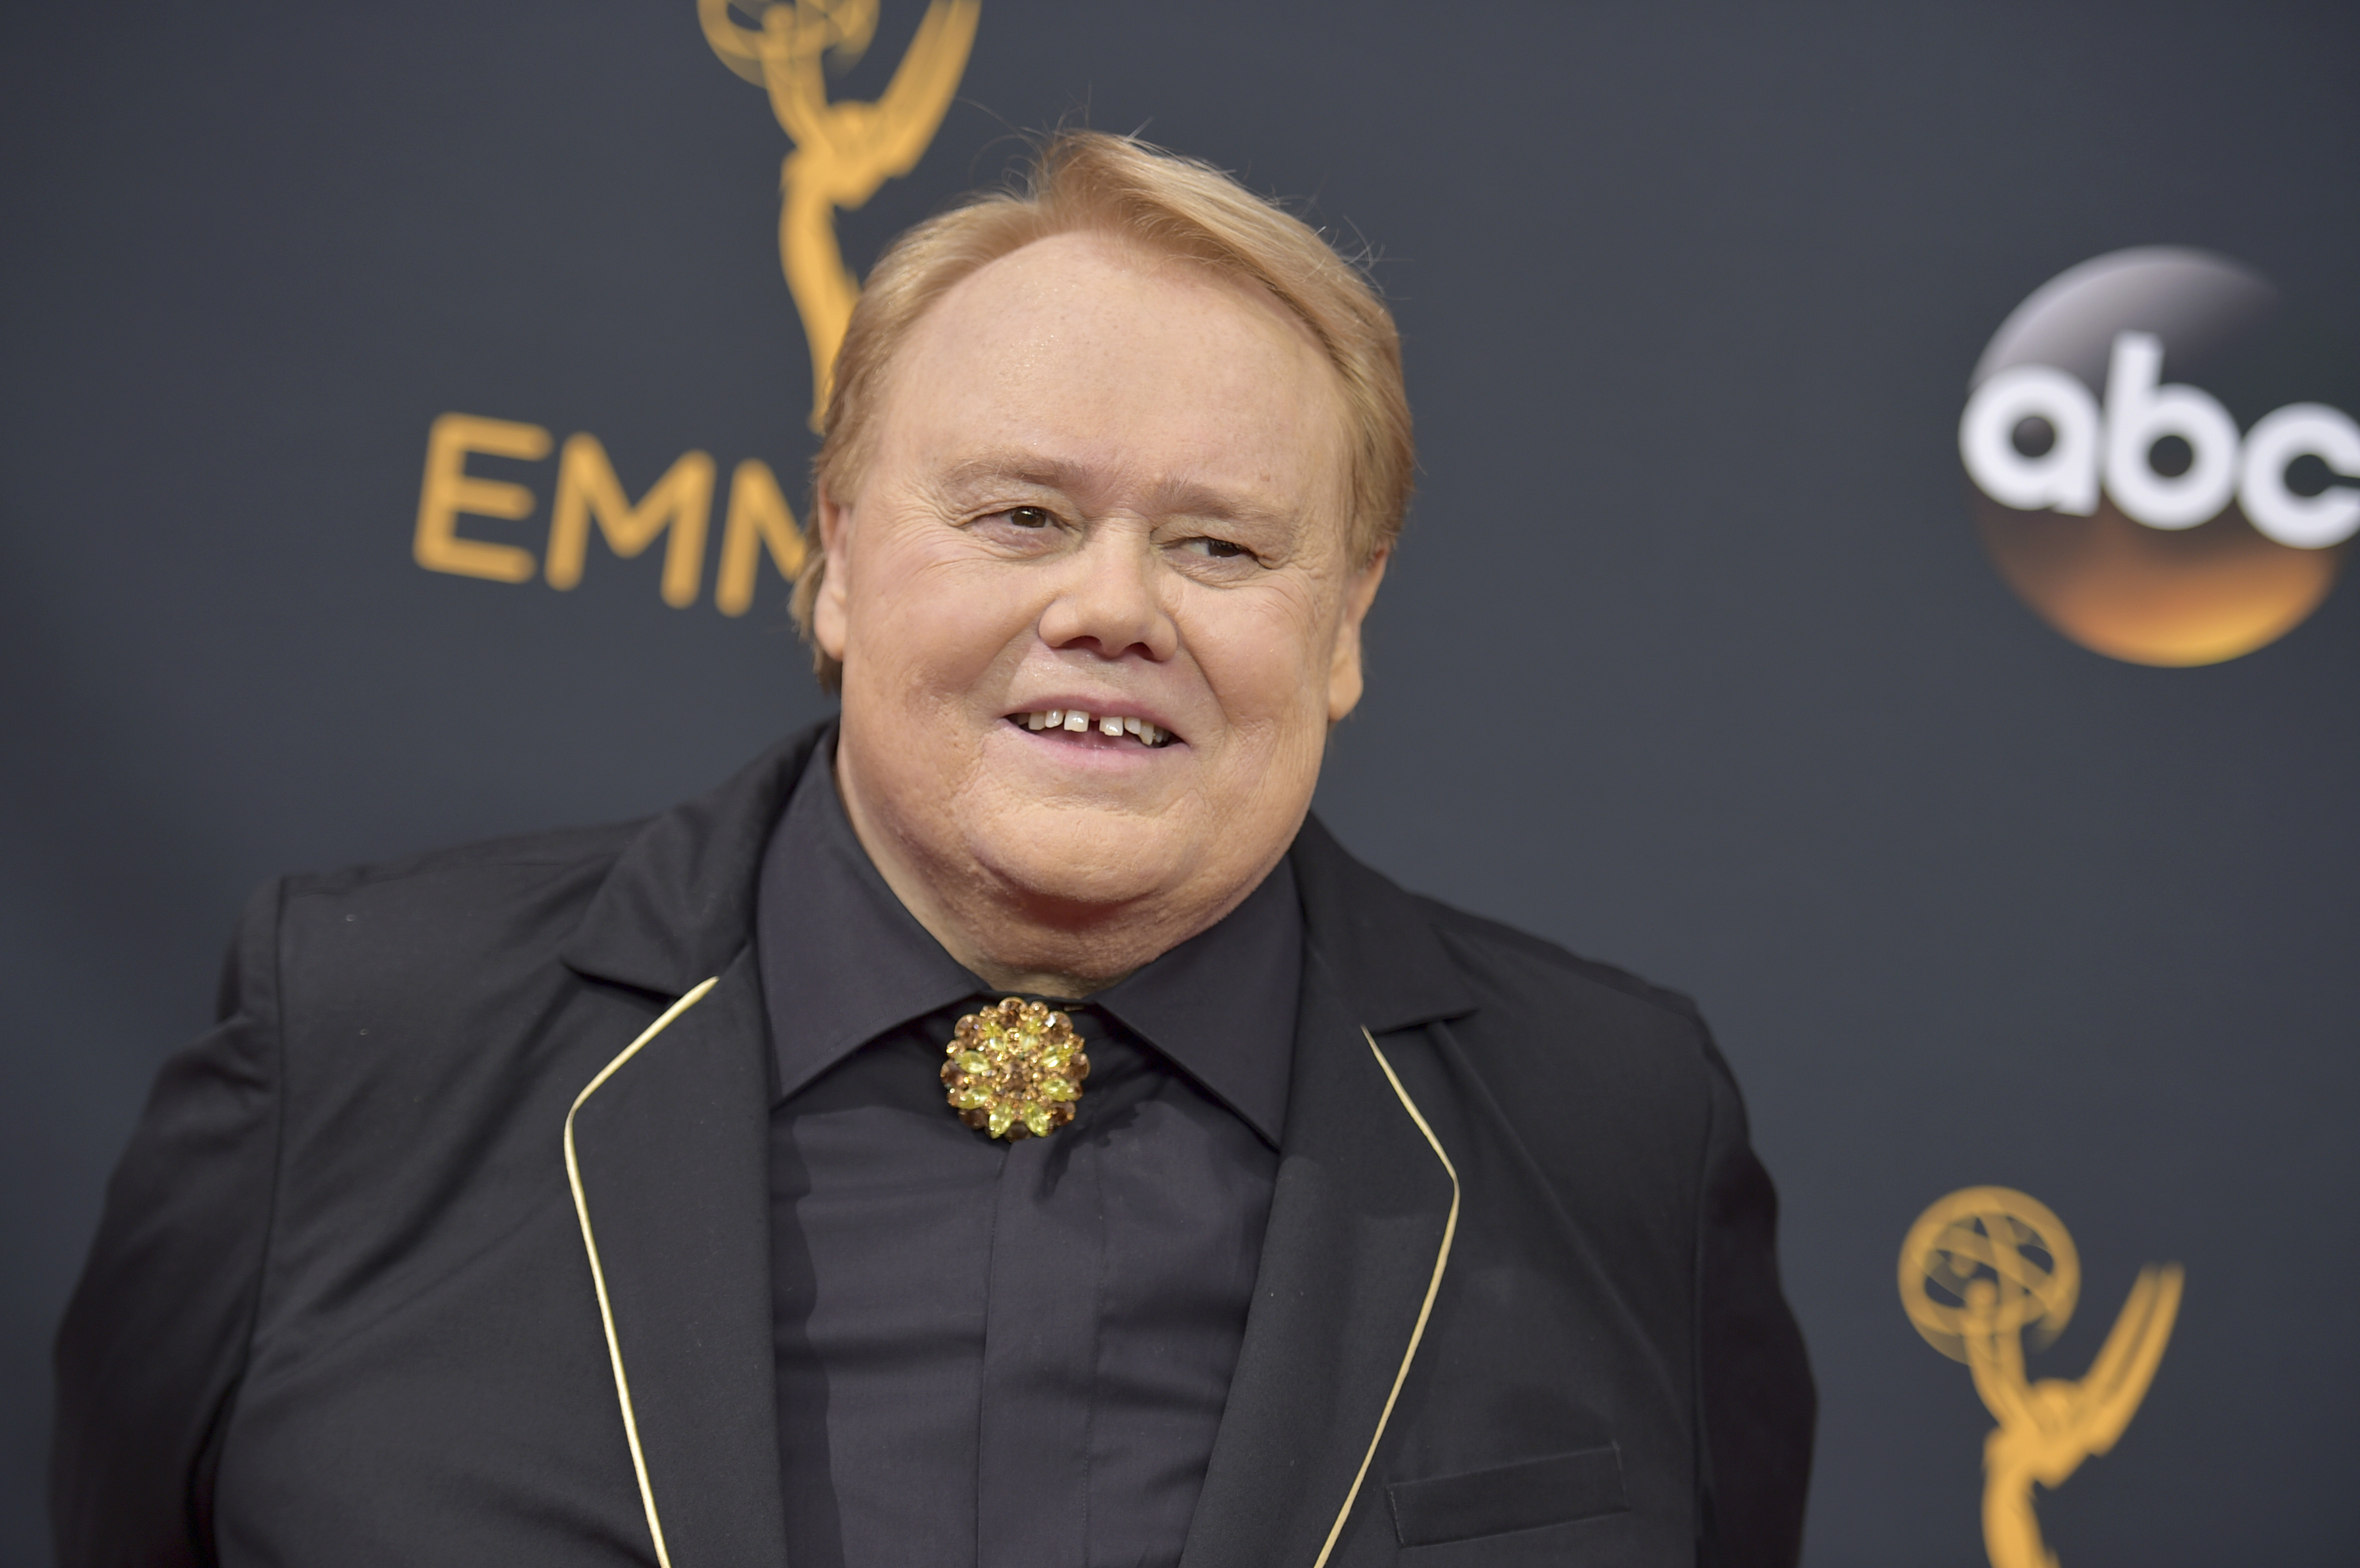 Actor-comedian Louie Anderson appears at the 68th Primetime Emmy Awards in Los Angeles on Sept. 18, 2016. A spokesman for Anderson says he is being treated for cancer in a Las Vegas hospital.